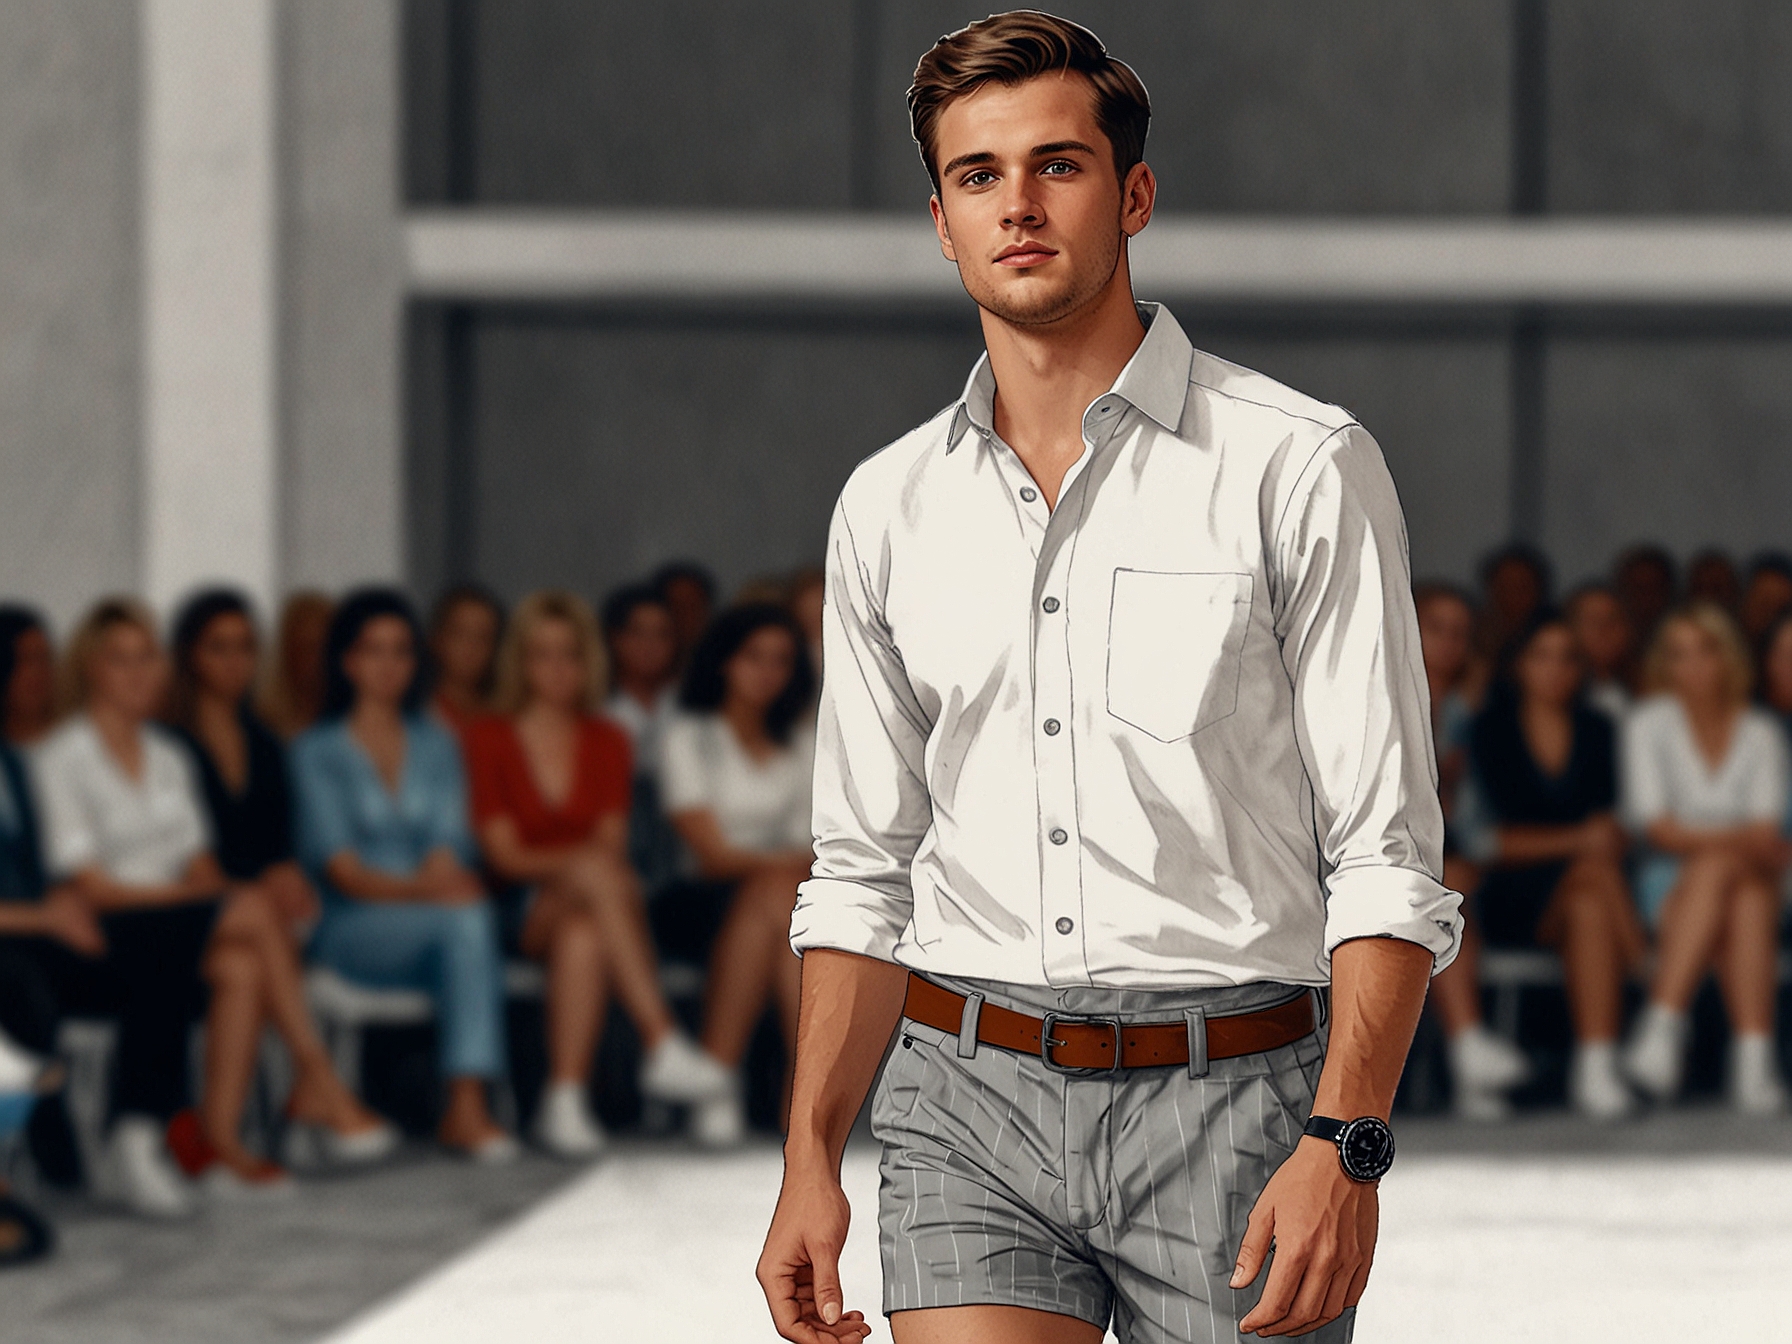 Paul Mescal confidently wearing short-shorts at a fashion show, paired with a button-down shirt, loafers, and mid-calf socks, epitomizing the bold new trend in men's fashion.